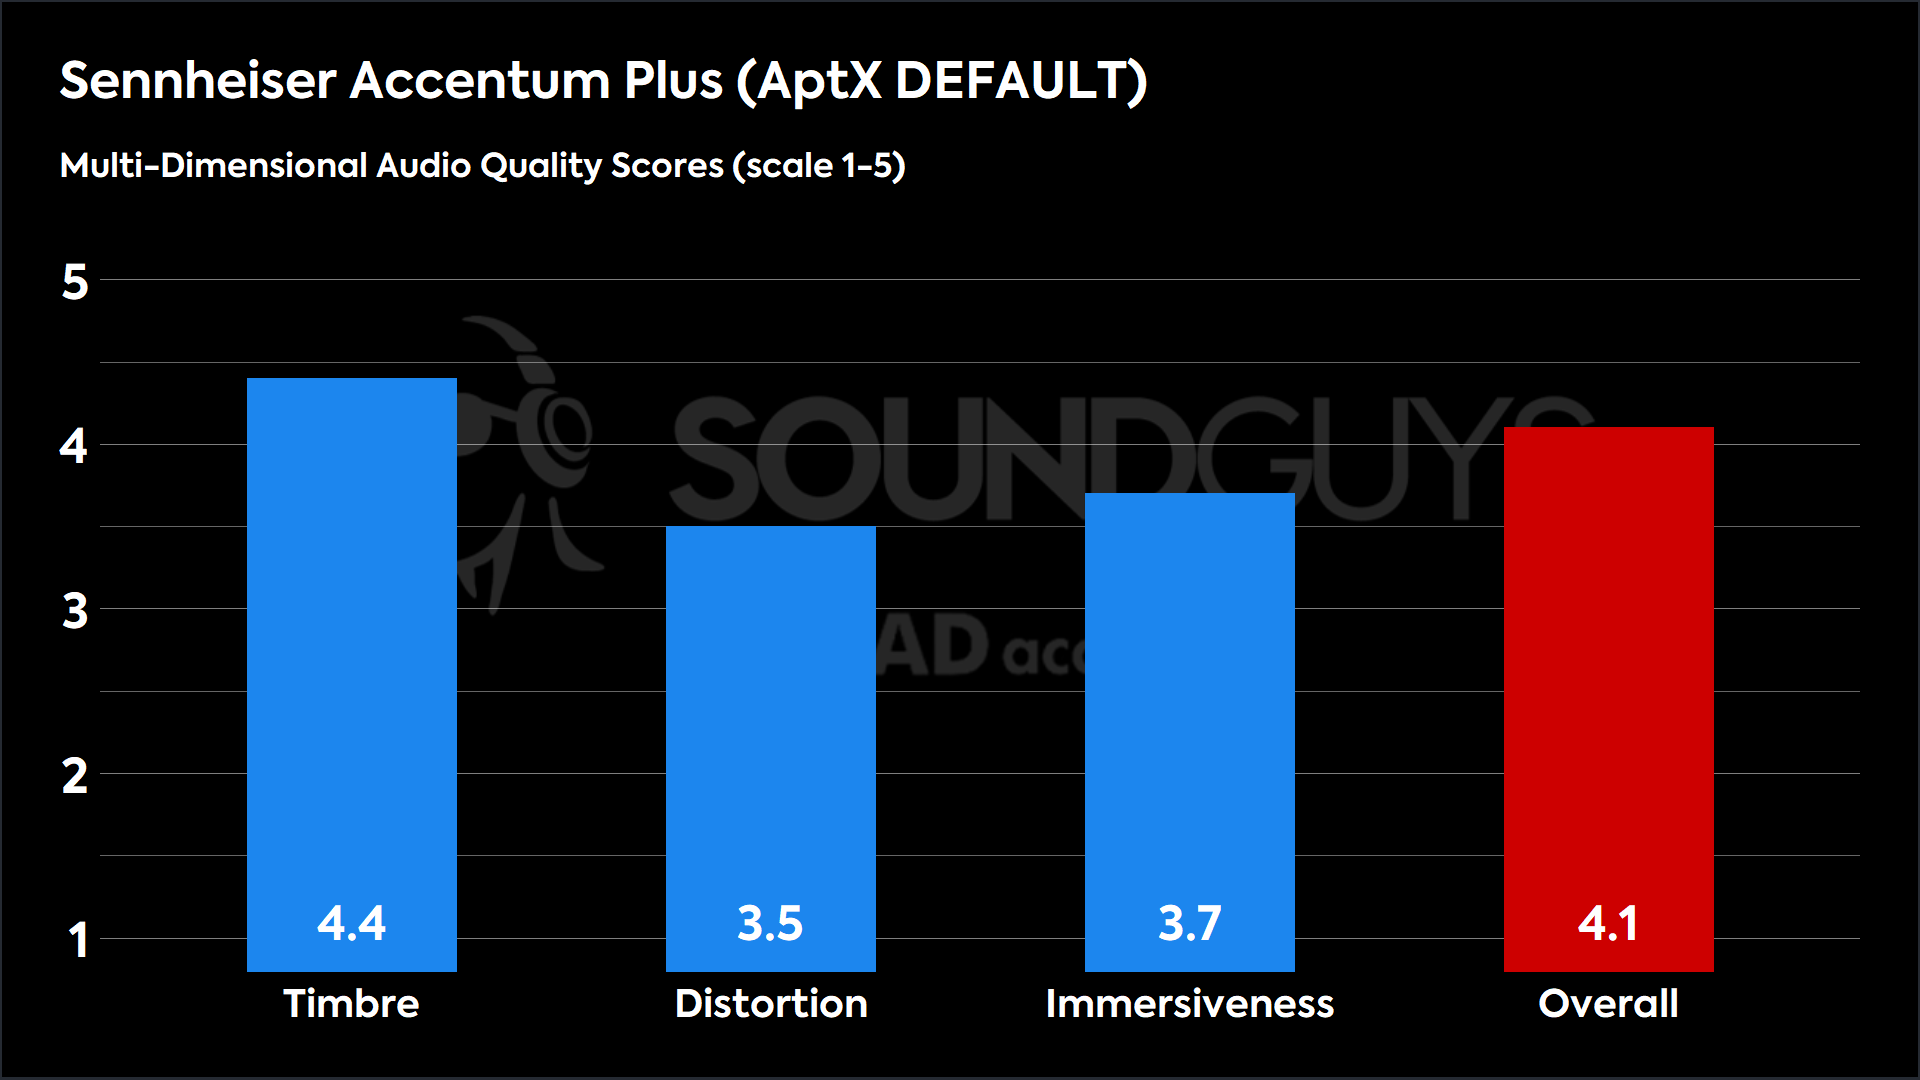 This chart shows the MDAQS results for the Sennheiser Accentum Plus in AptX DEFAULT mode. The Timbre score is 4.4, The Distortion score is 3.5, the Immersiveness score is 3.7, and the Overall Score is 4.1).